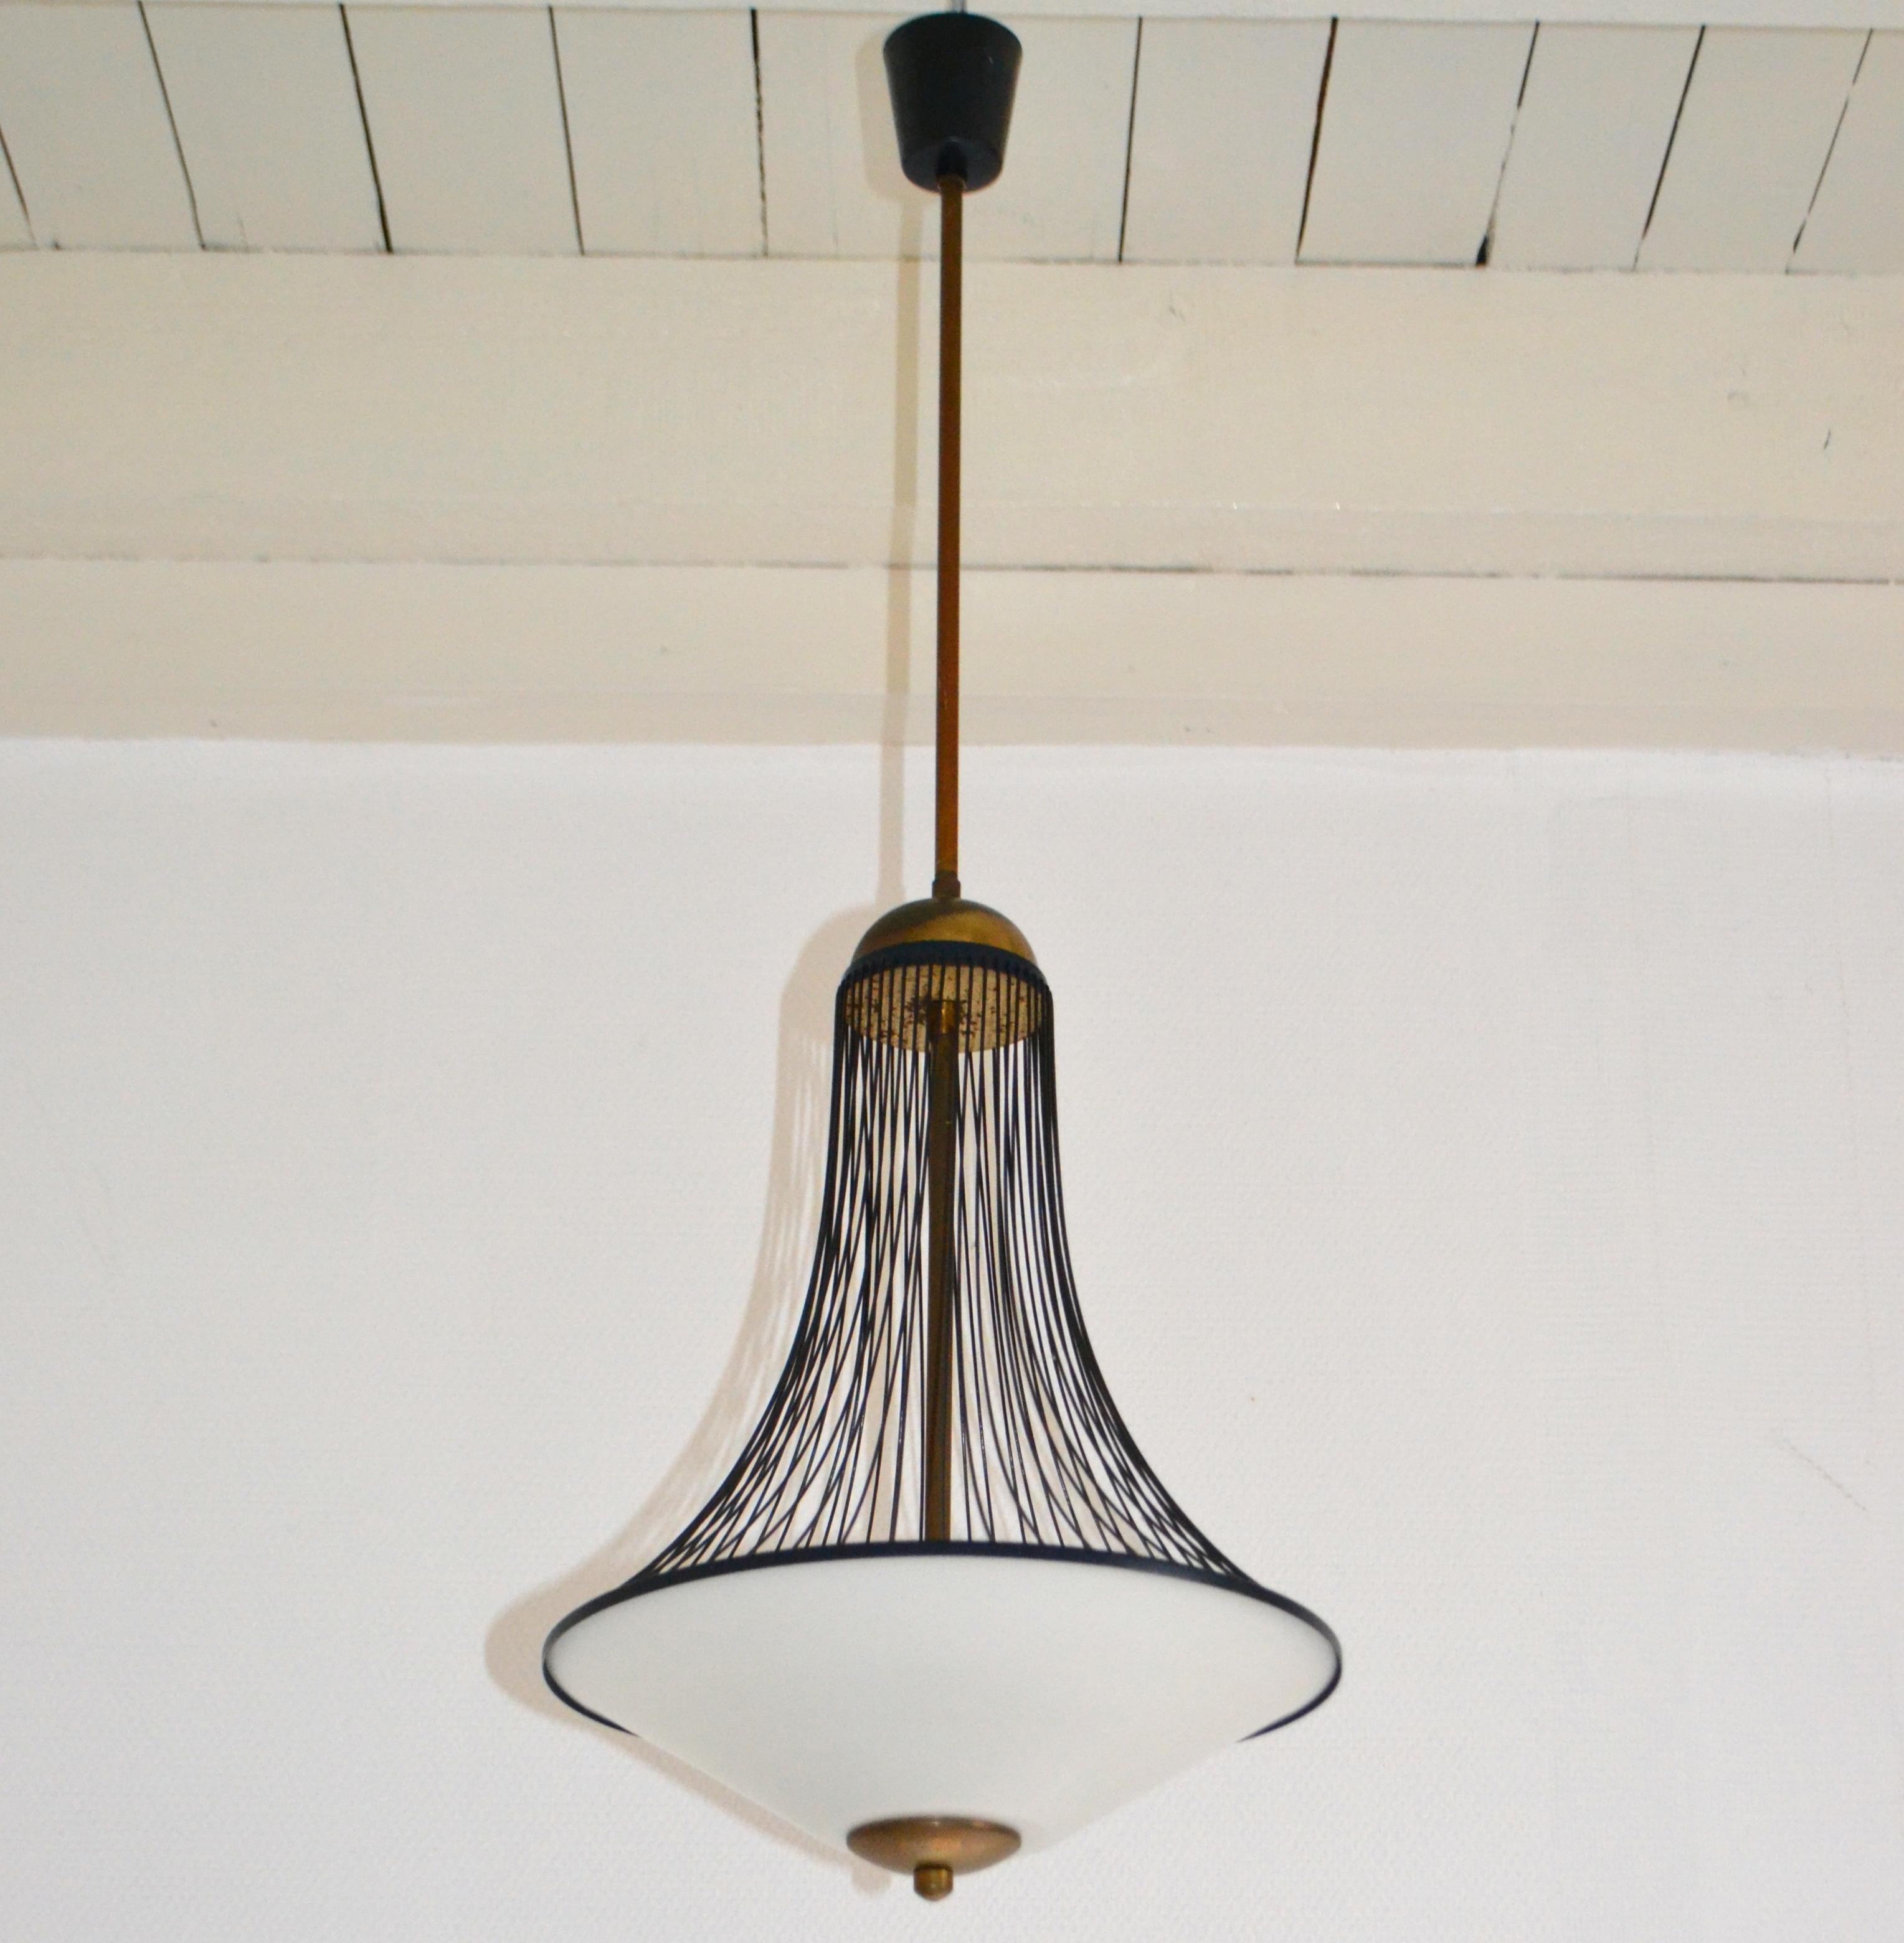 Italian 1960's pendant or lantern has a milk glass shade connected to a curvaceous open wire metal frame and brass connections.
This pendant lamp suggesting a lantern is very functional for general light and most suitable for a hallway center